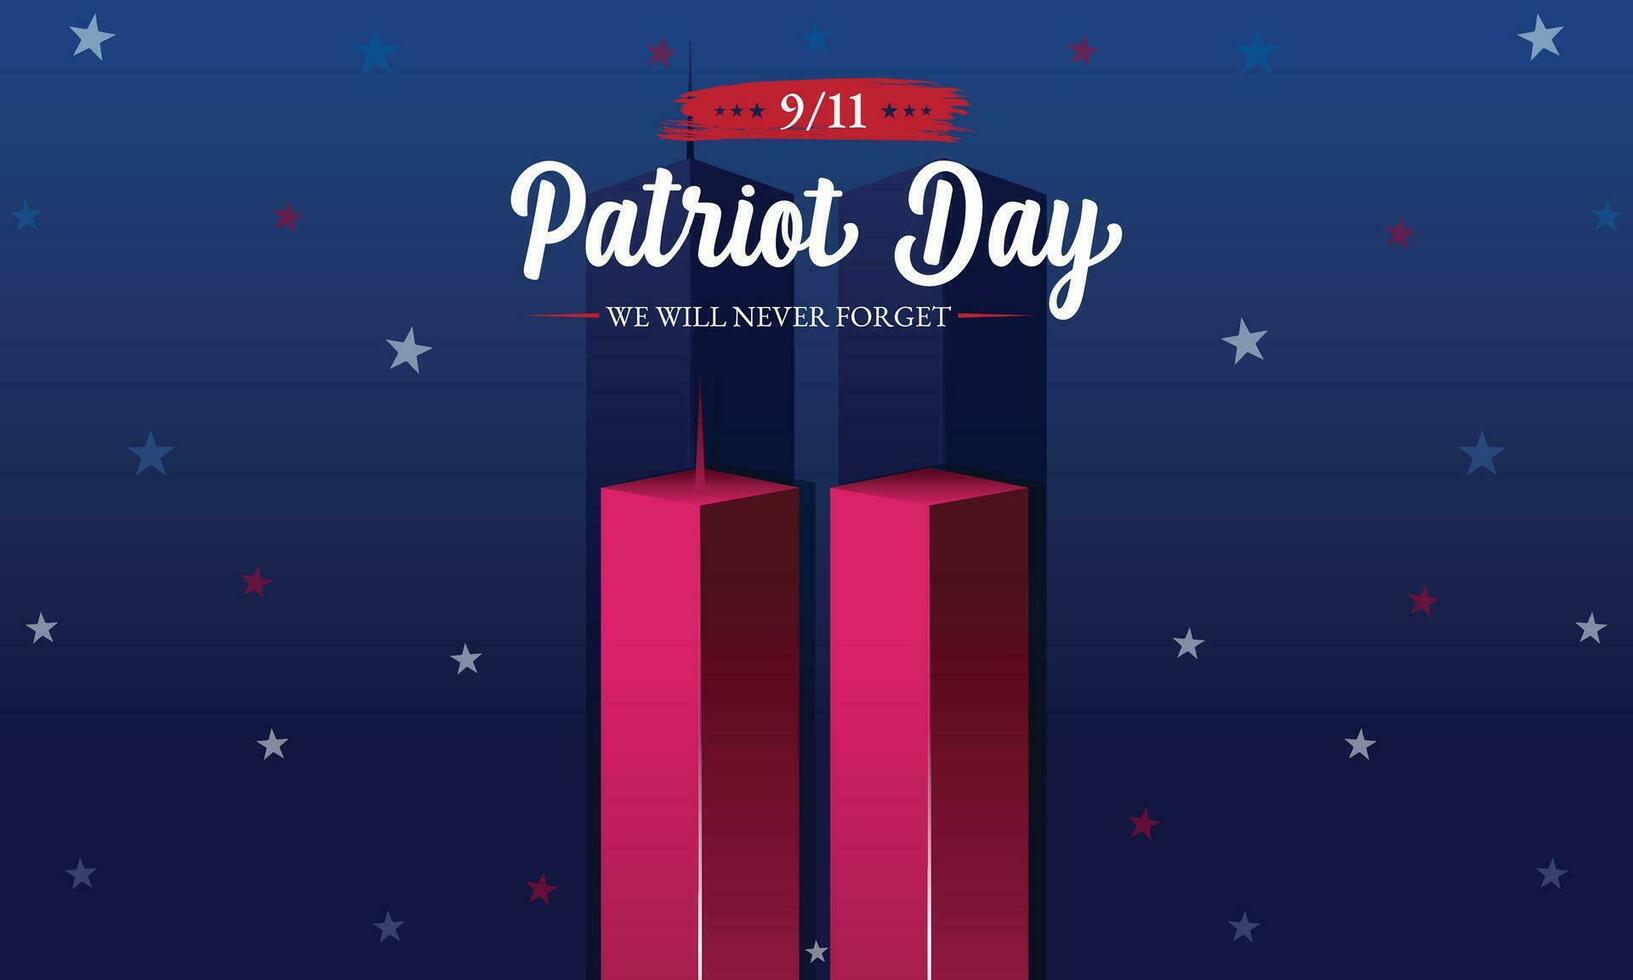 Remembering September 9 11. Patriot Day. September 11. Never Forget USA 9 11. Twin Towers On American Flag. World Trade Center Nine Eleven. Vector Design Template With Red, White And Blue Colours